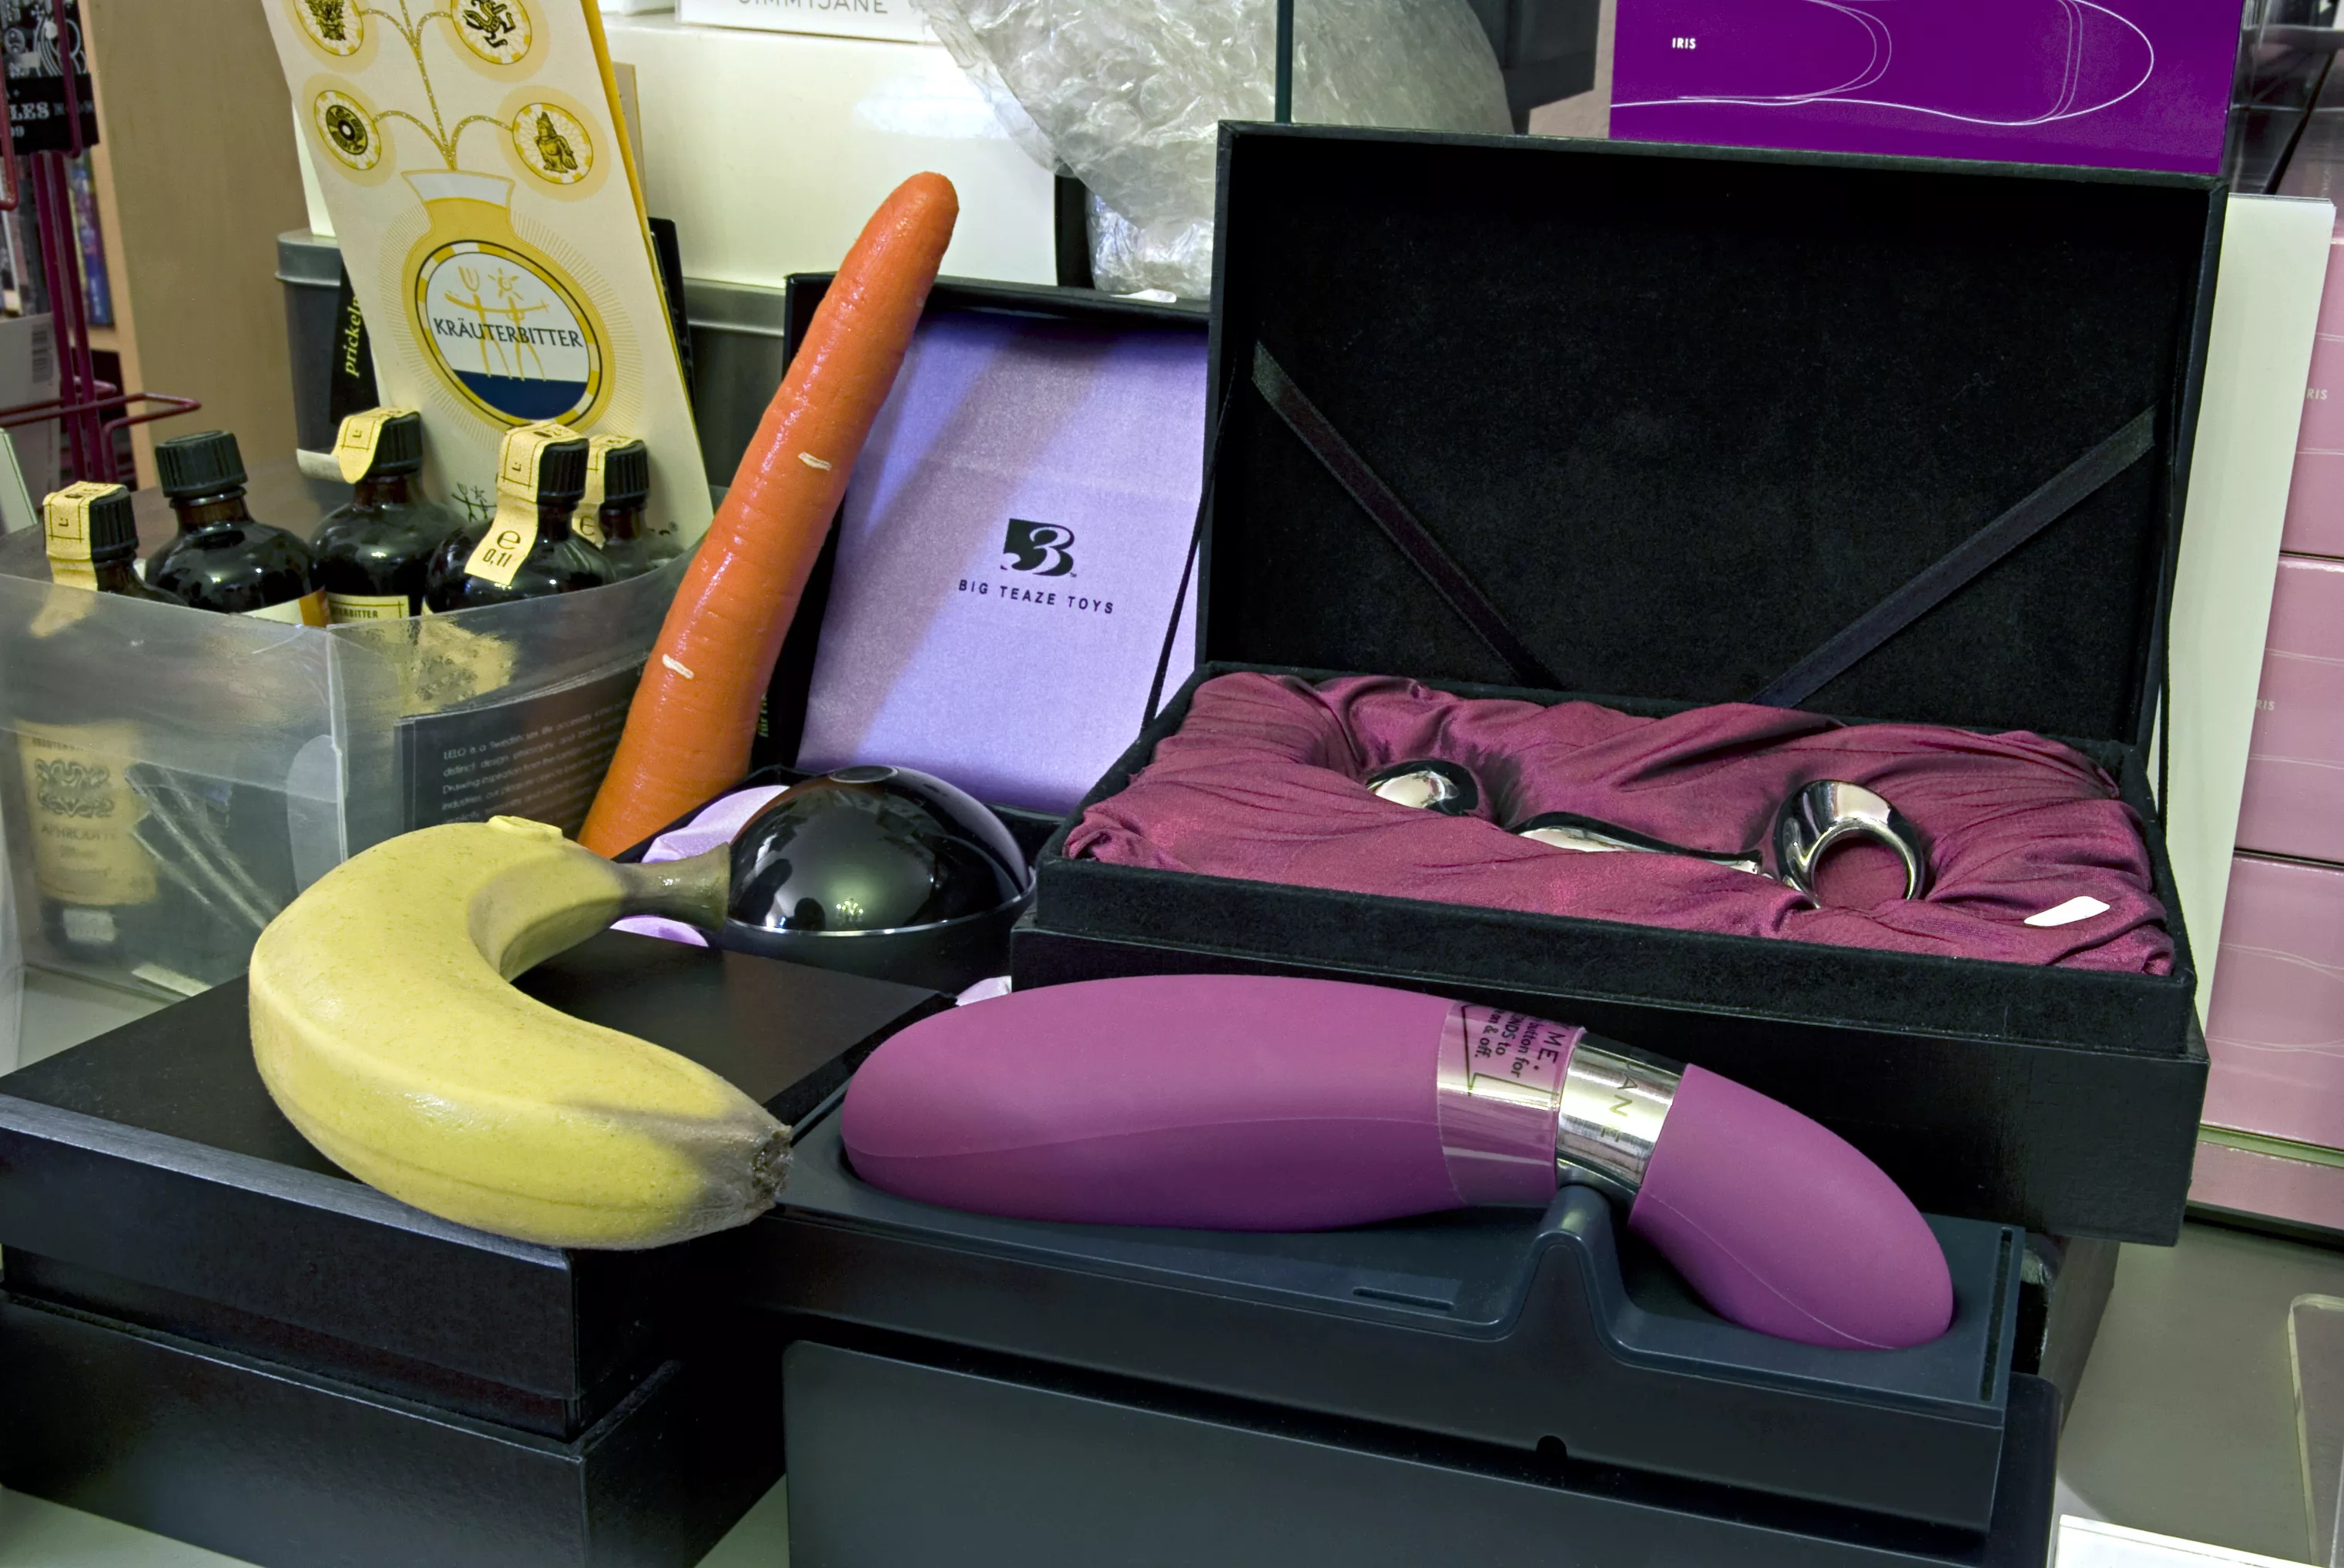 Joy Sensual Sex Toys in Italy, europe | Sex Products - Rated 4.8